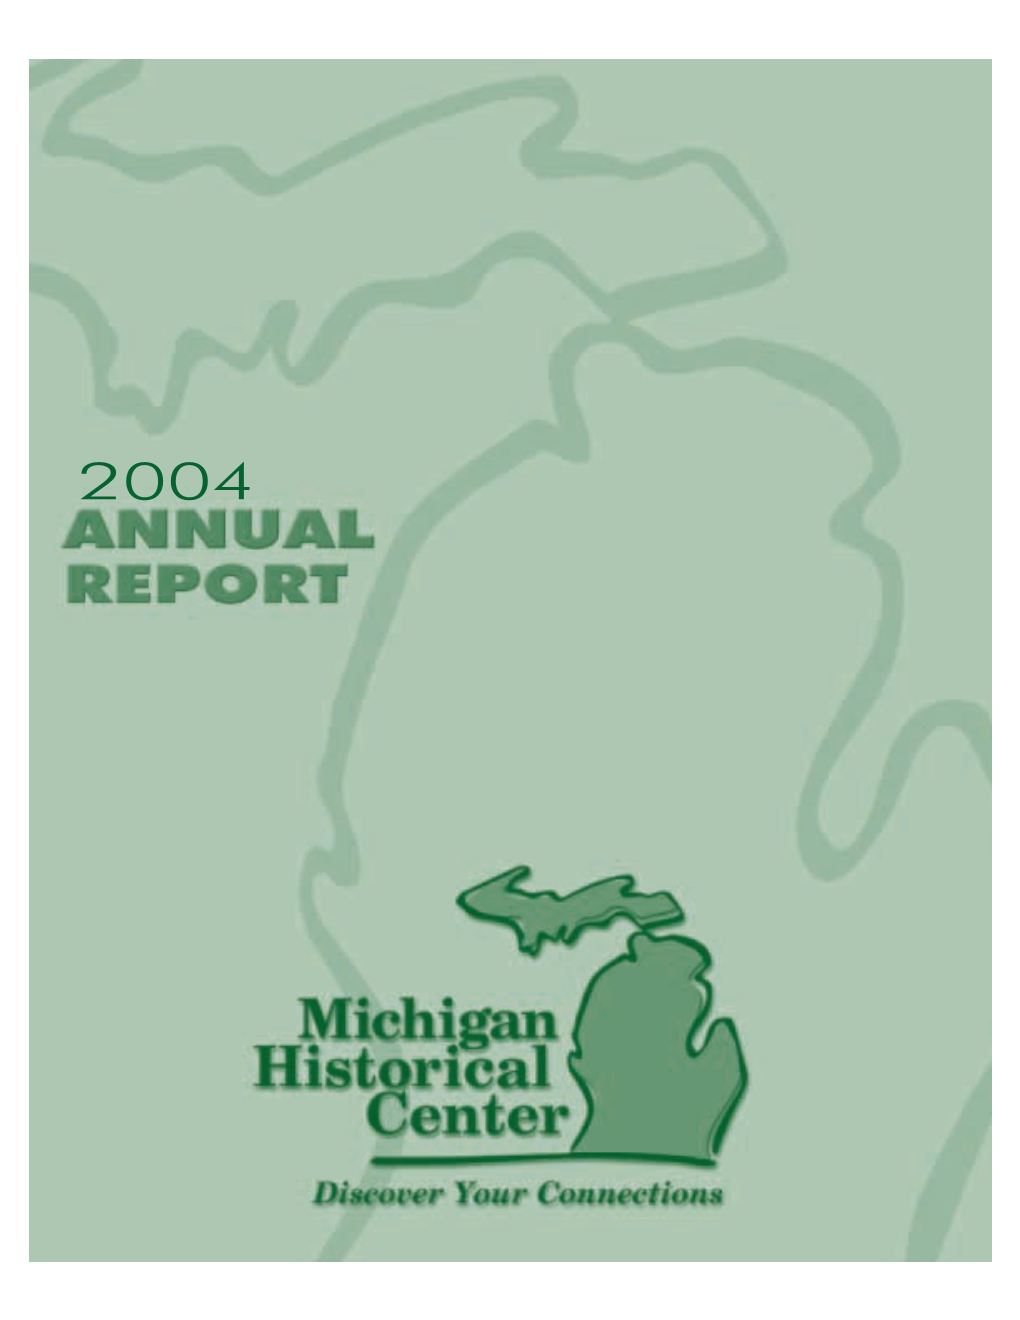 2004 Inside Front Cover of Book Is Blank MICHIGAN HISTORICAL CENTER 2004 Annual Report